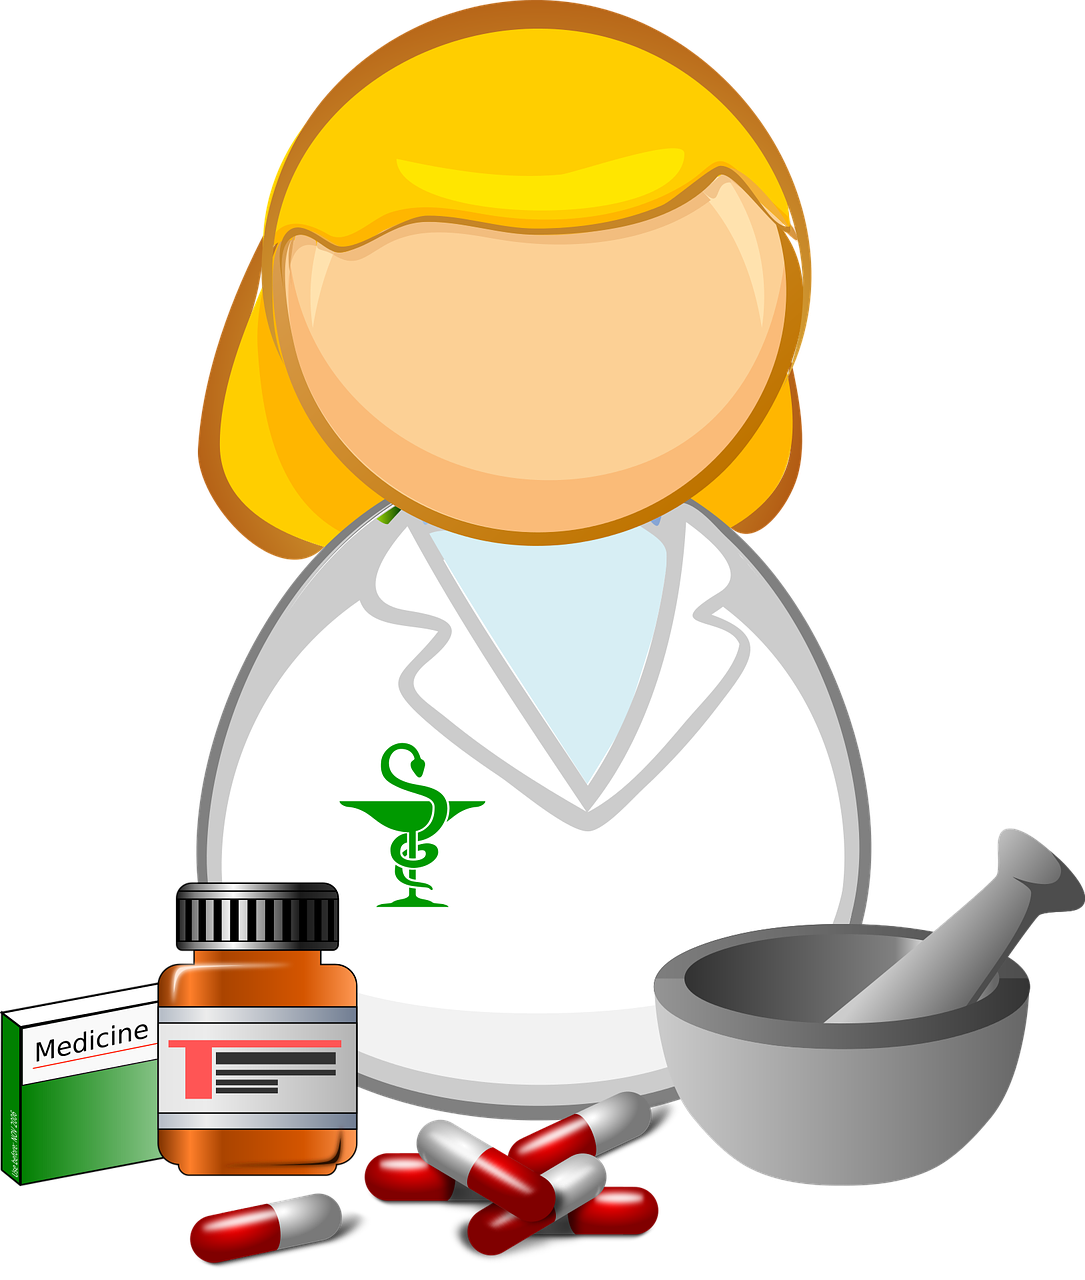 Pharmacy clipart medication management. Virtual ability how can